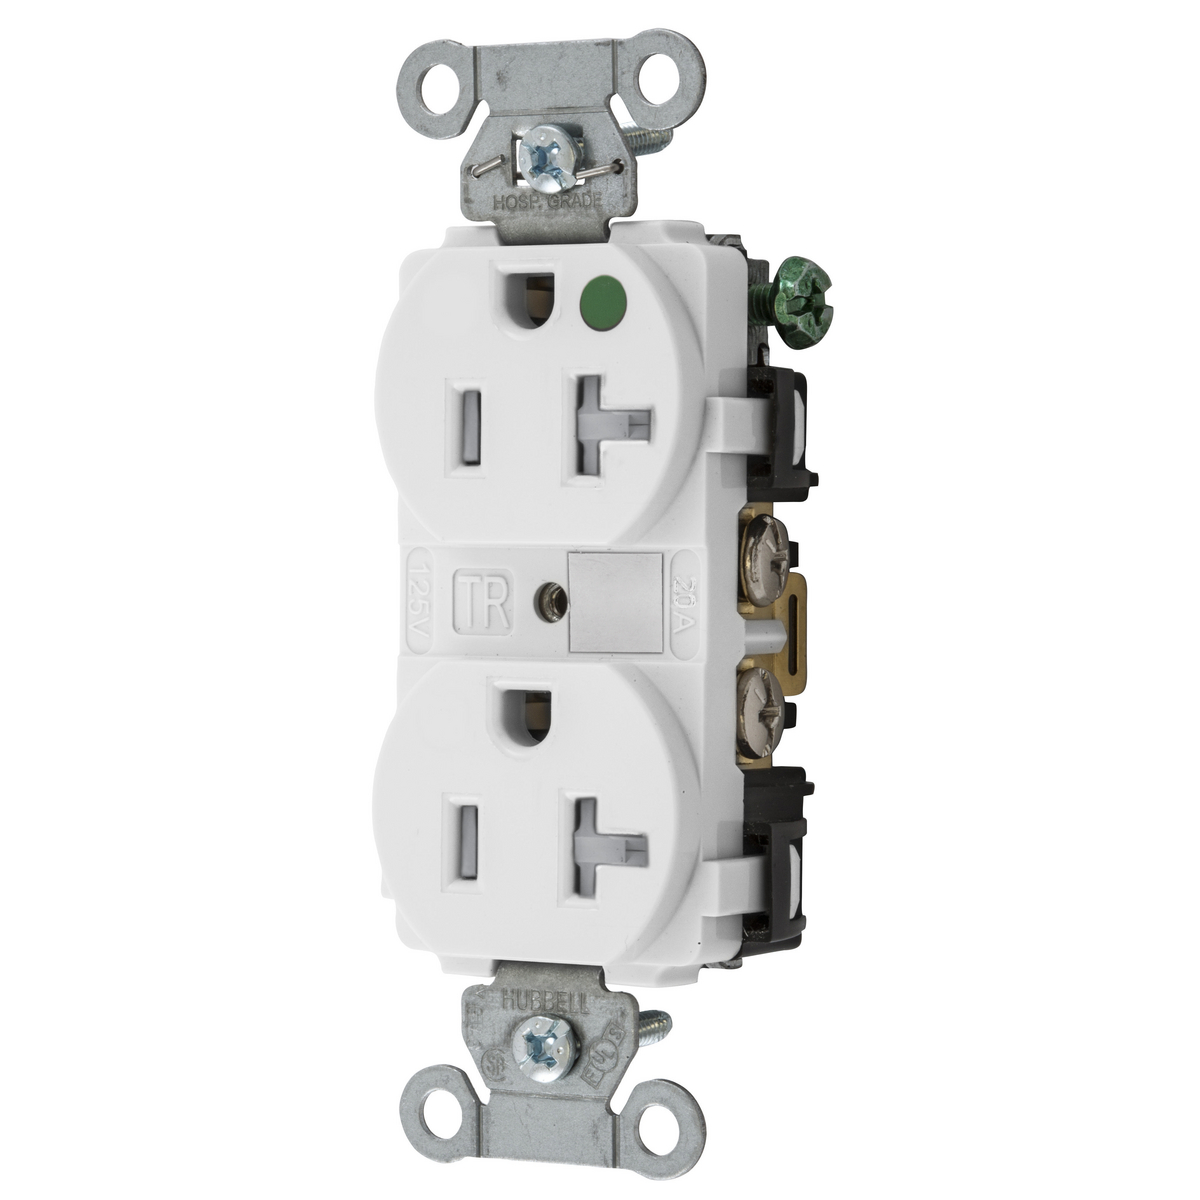 8300WTRA Duplex Receptacle Hubbell Wiring Device-Kellems